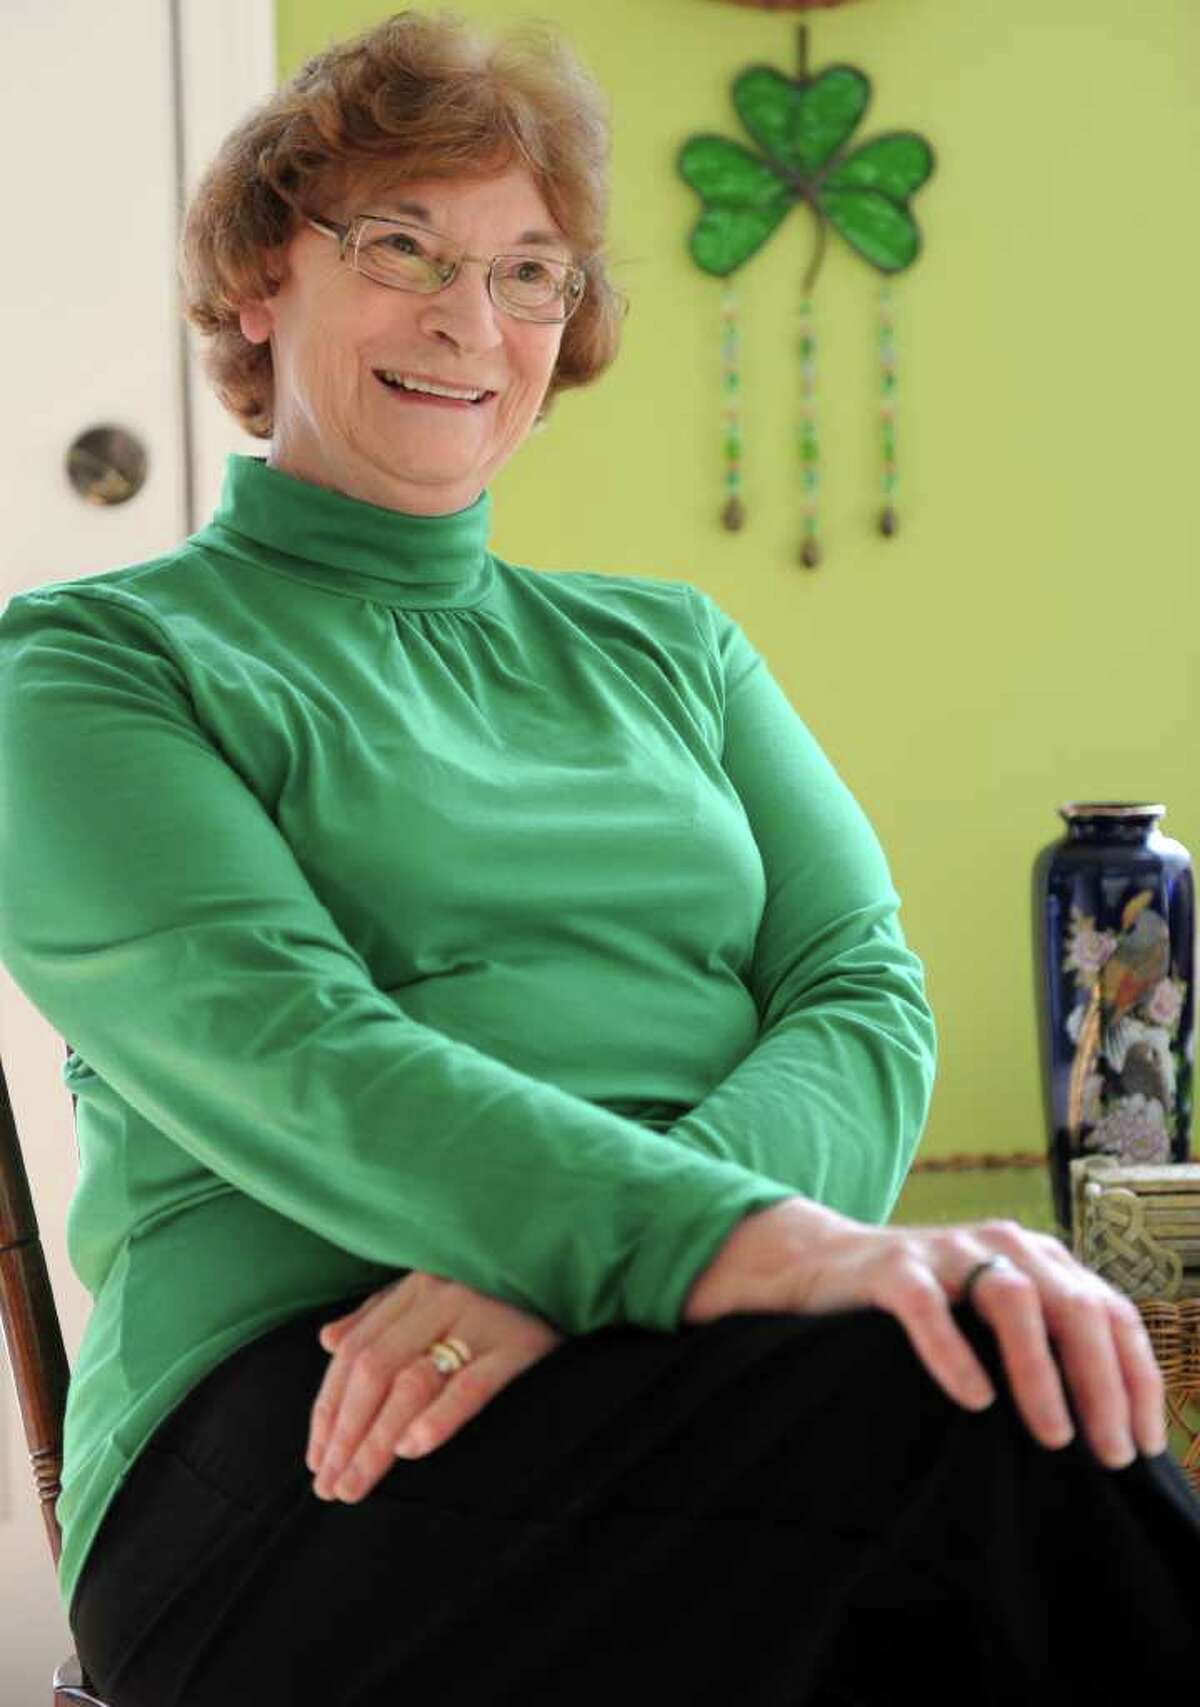 Mary McMahon attends a meeting of the Connecticut Irish-American Historical Society in Orange, Conn.